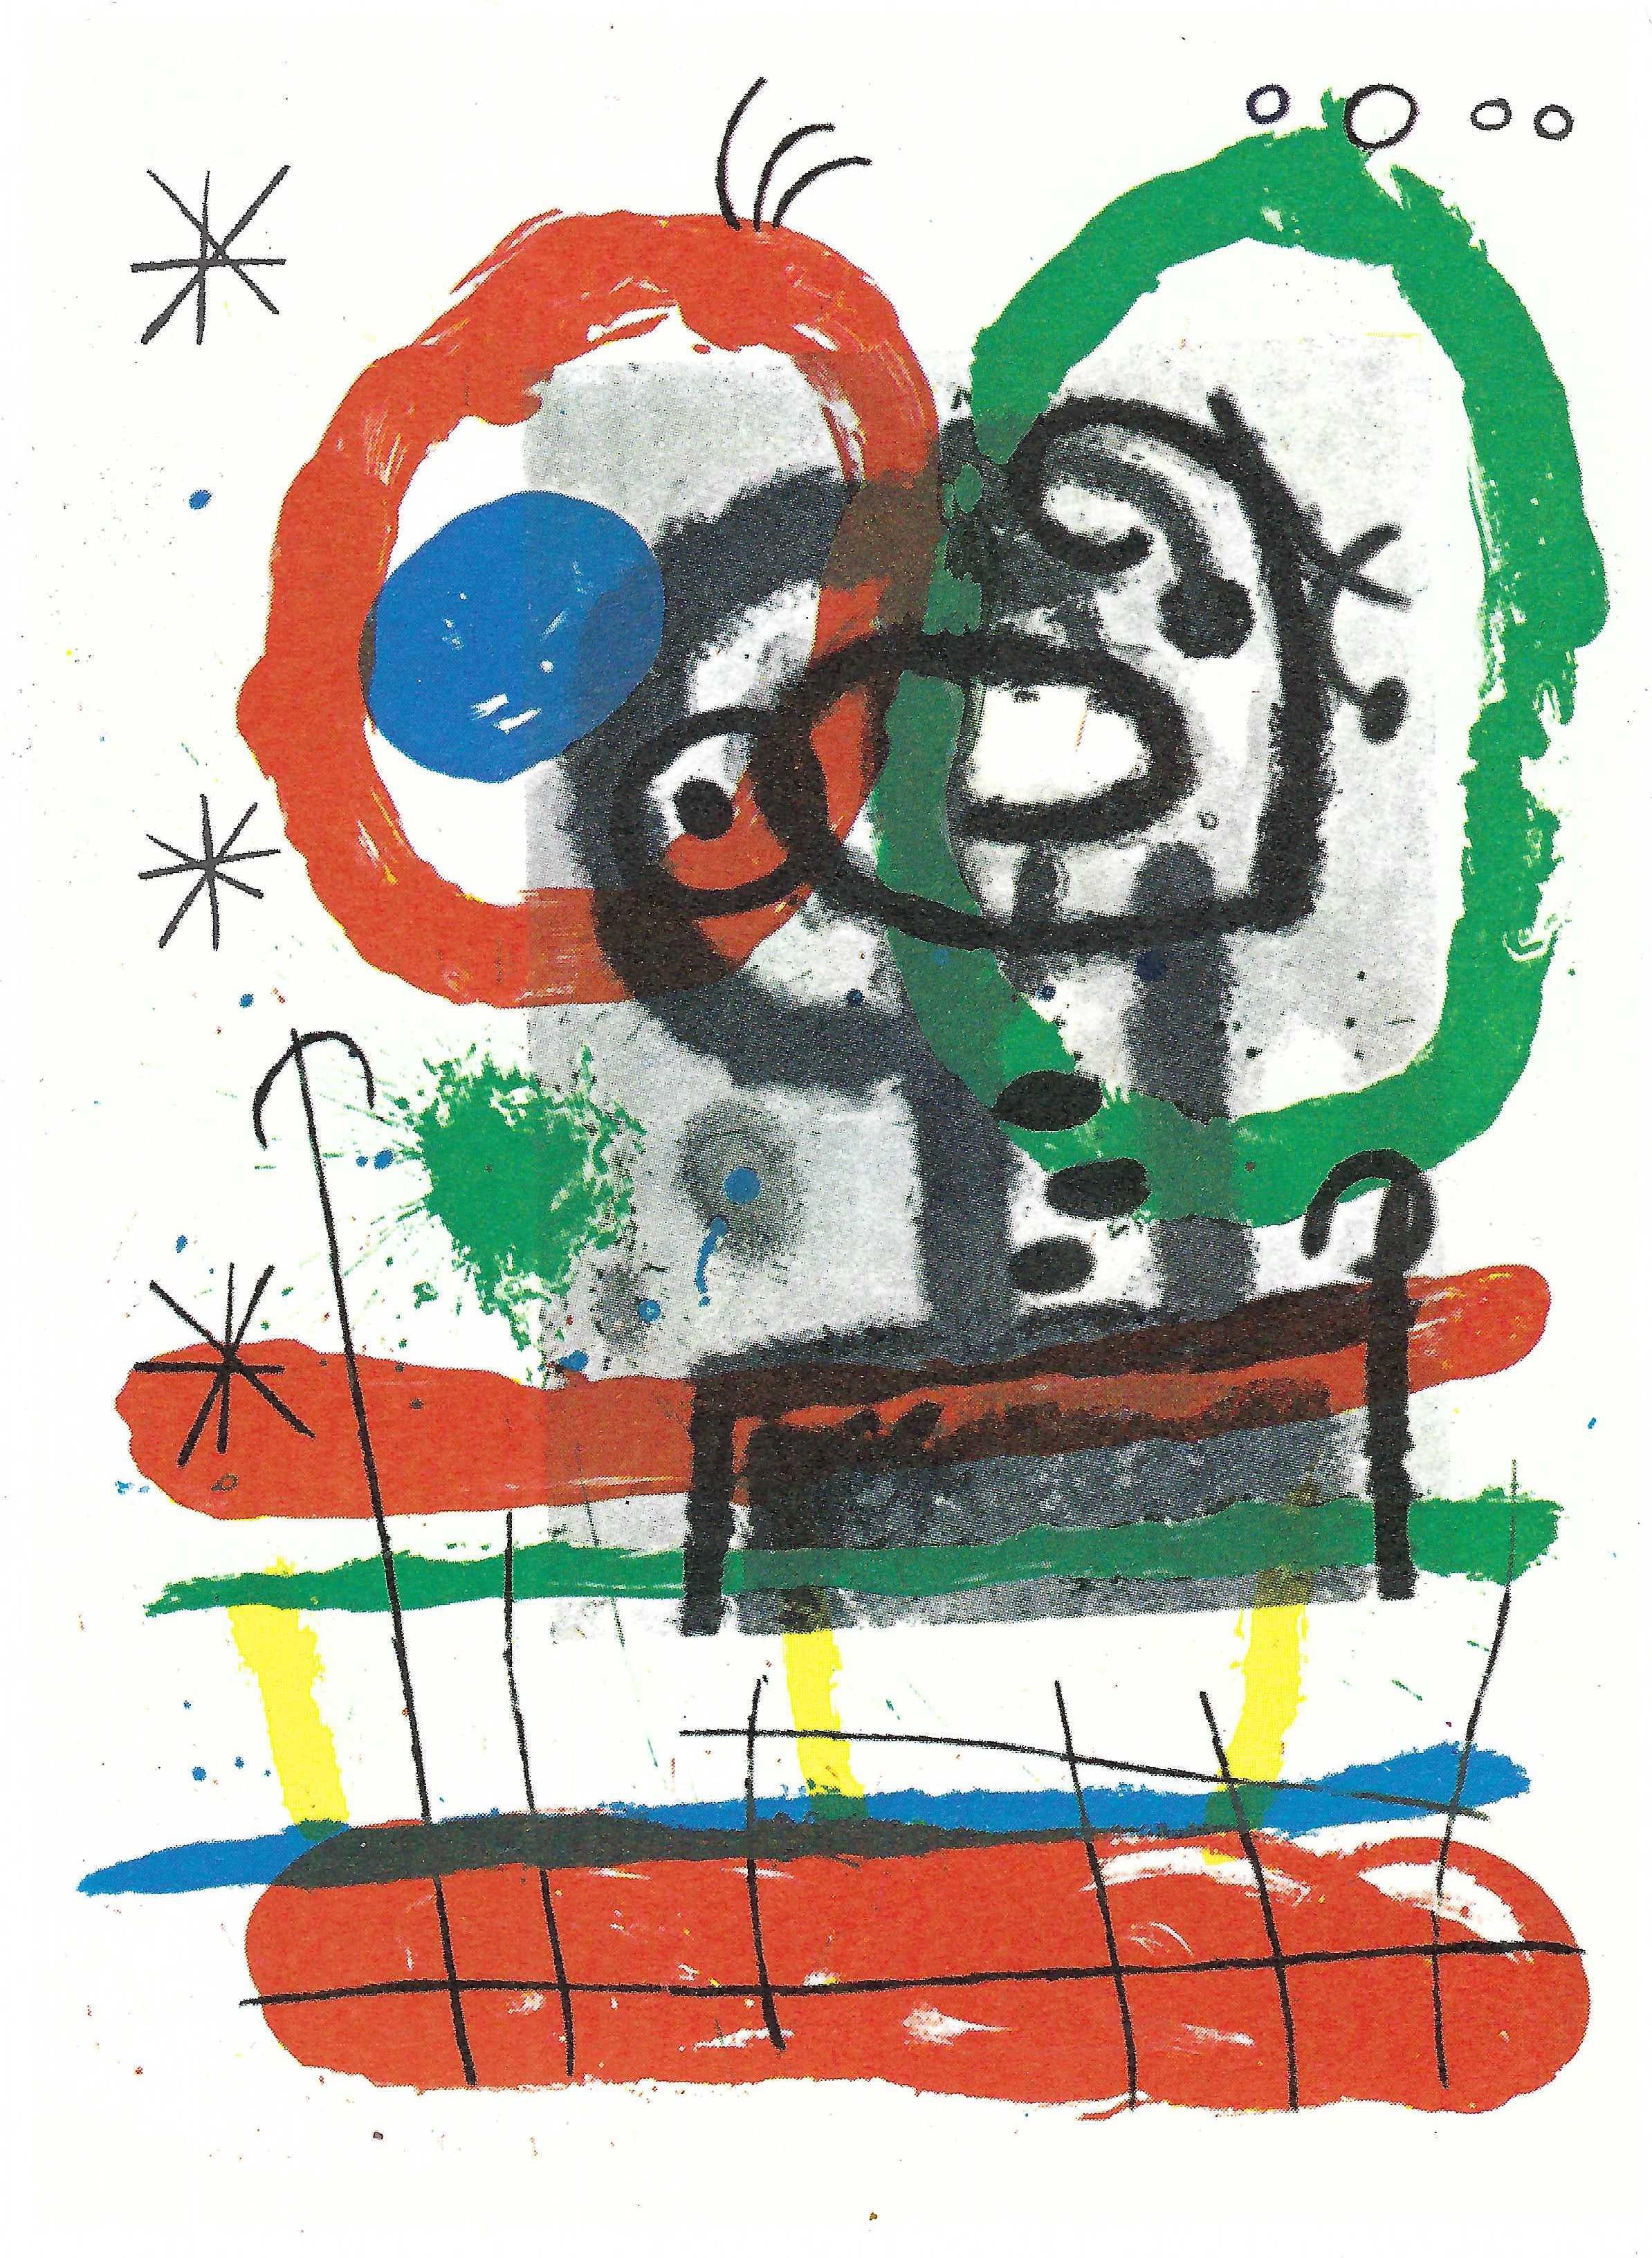 Joan Miró Abstract Print - Plate 10, from 1965 Peintures sur Cartons